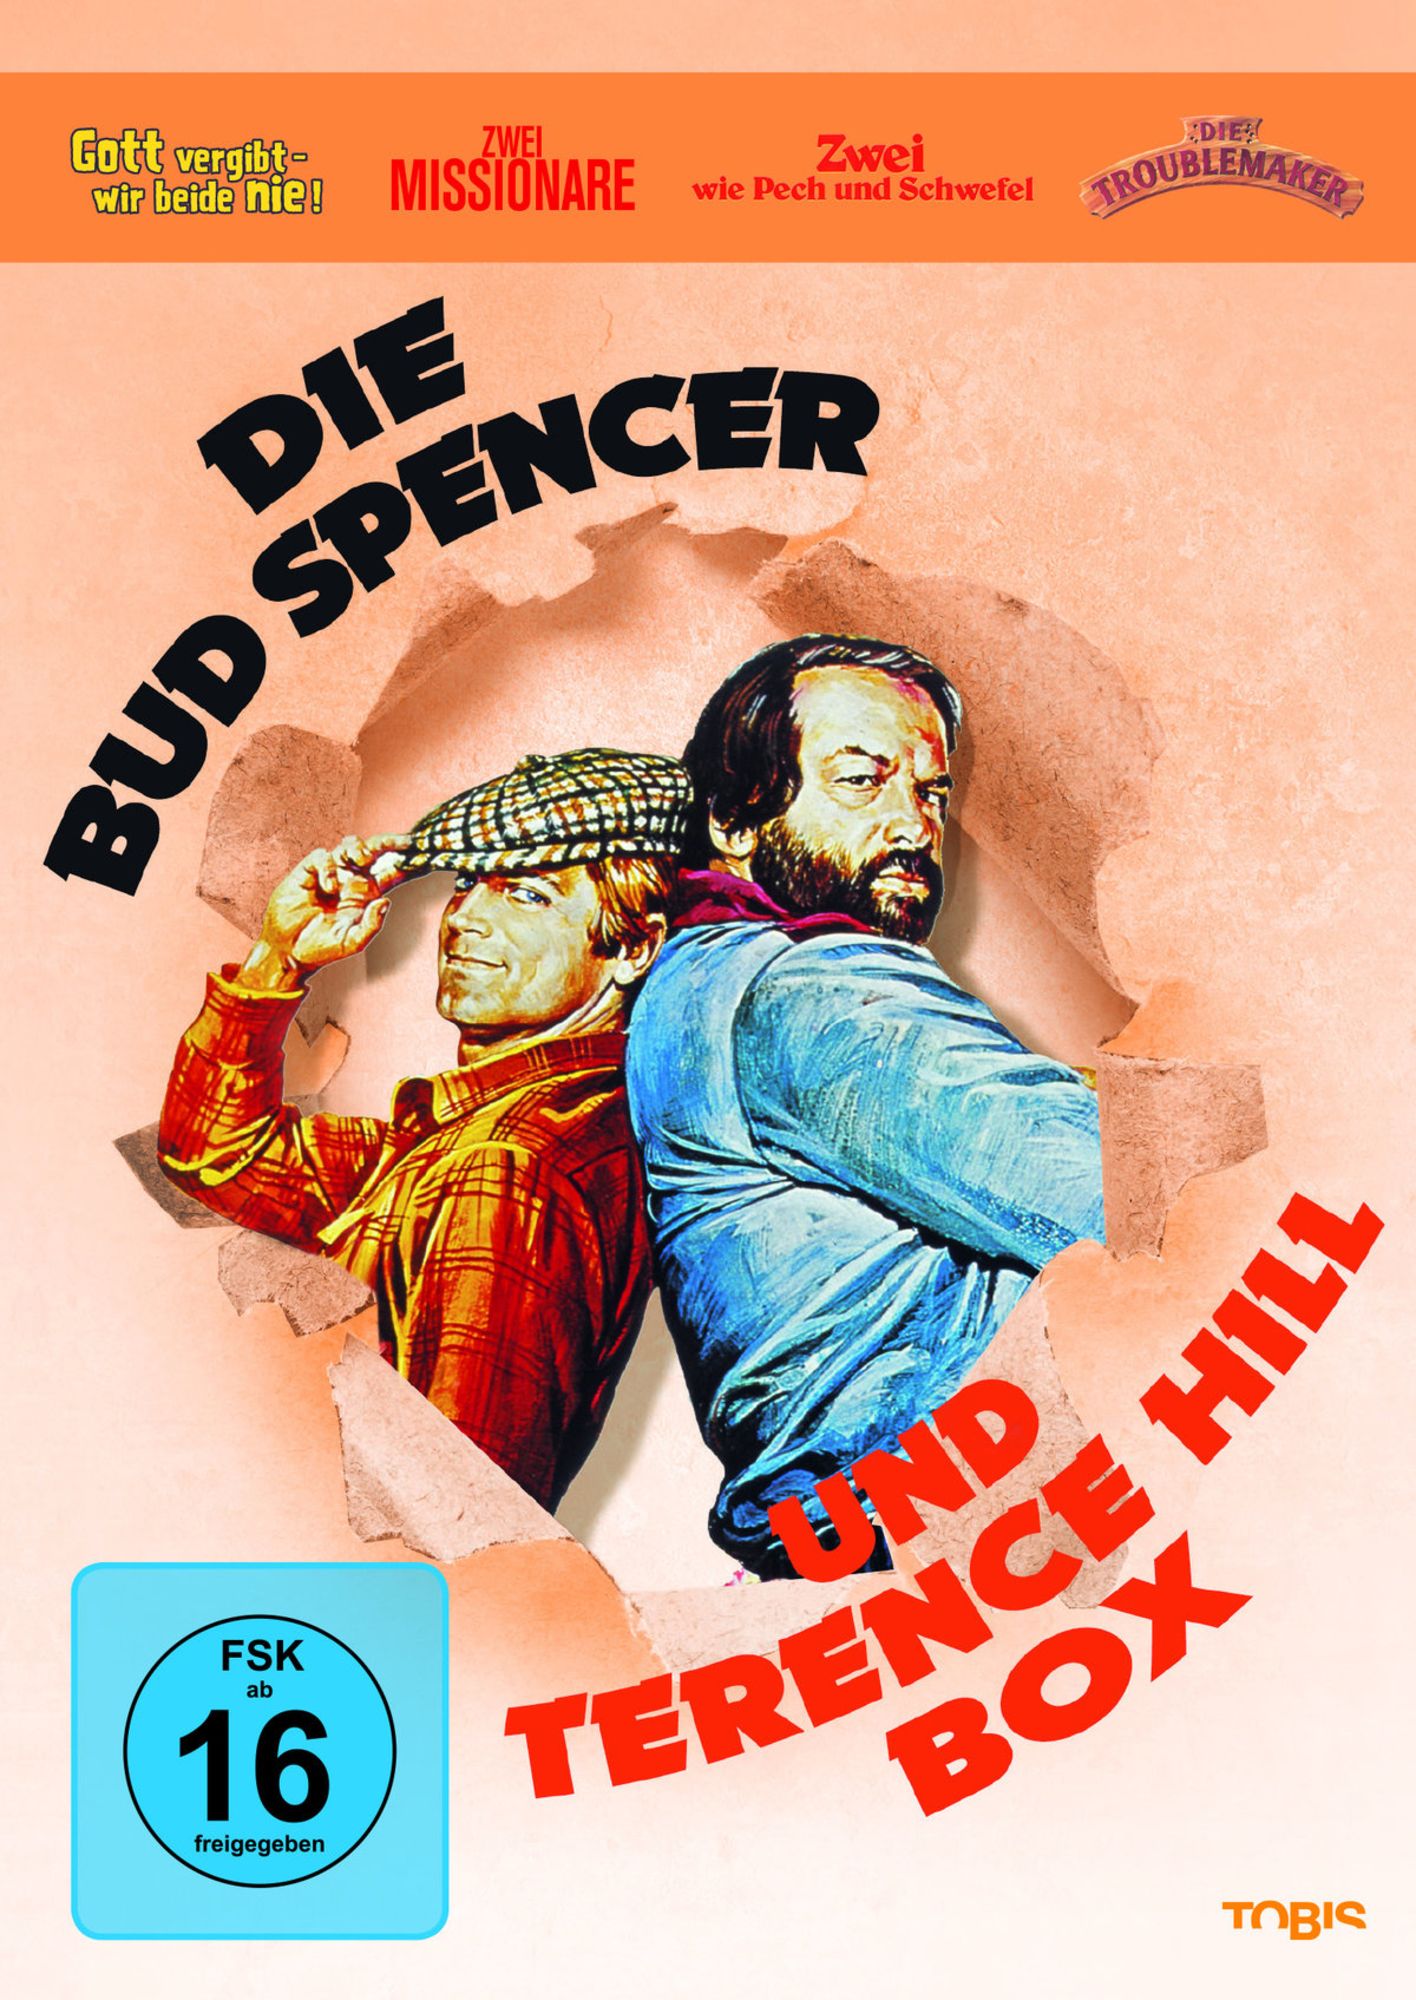 Die Bud Spencer und Terence Hill Box [4 DVDs]' von 'Terence Hill' - 'DVD